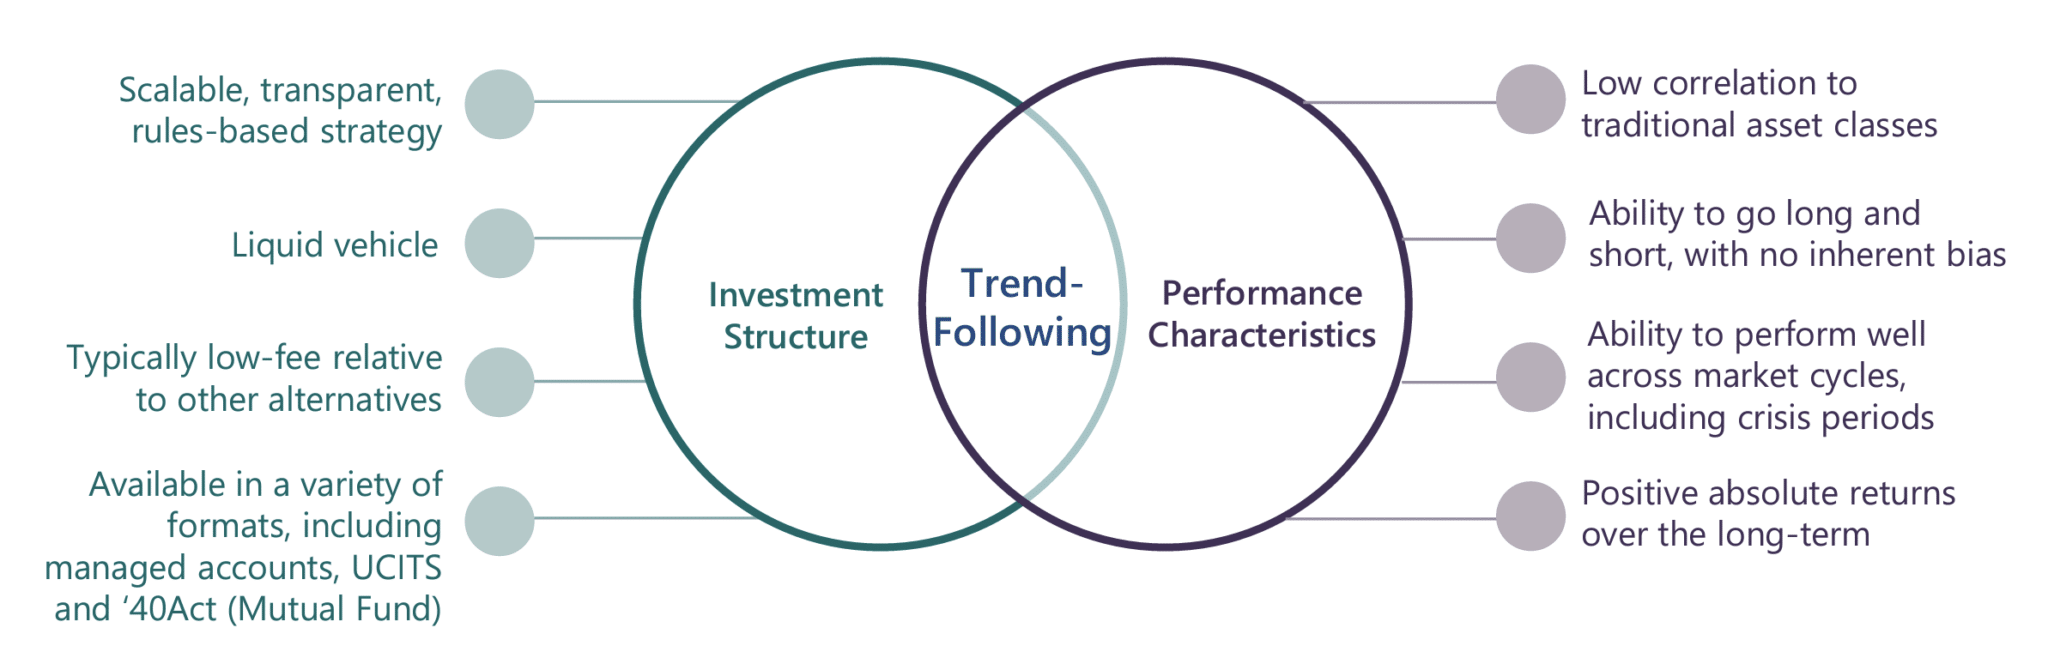 Trend following investment structure and performance characteristics